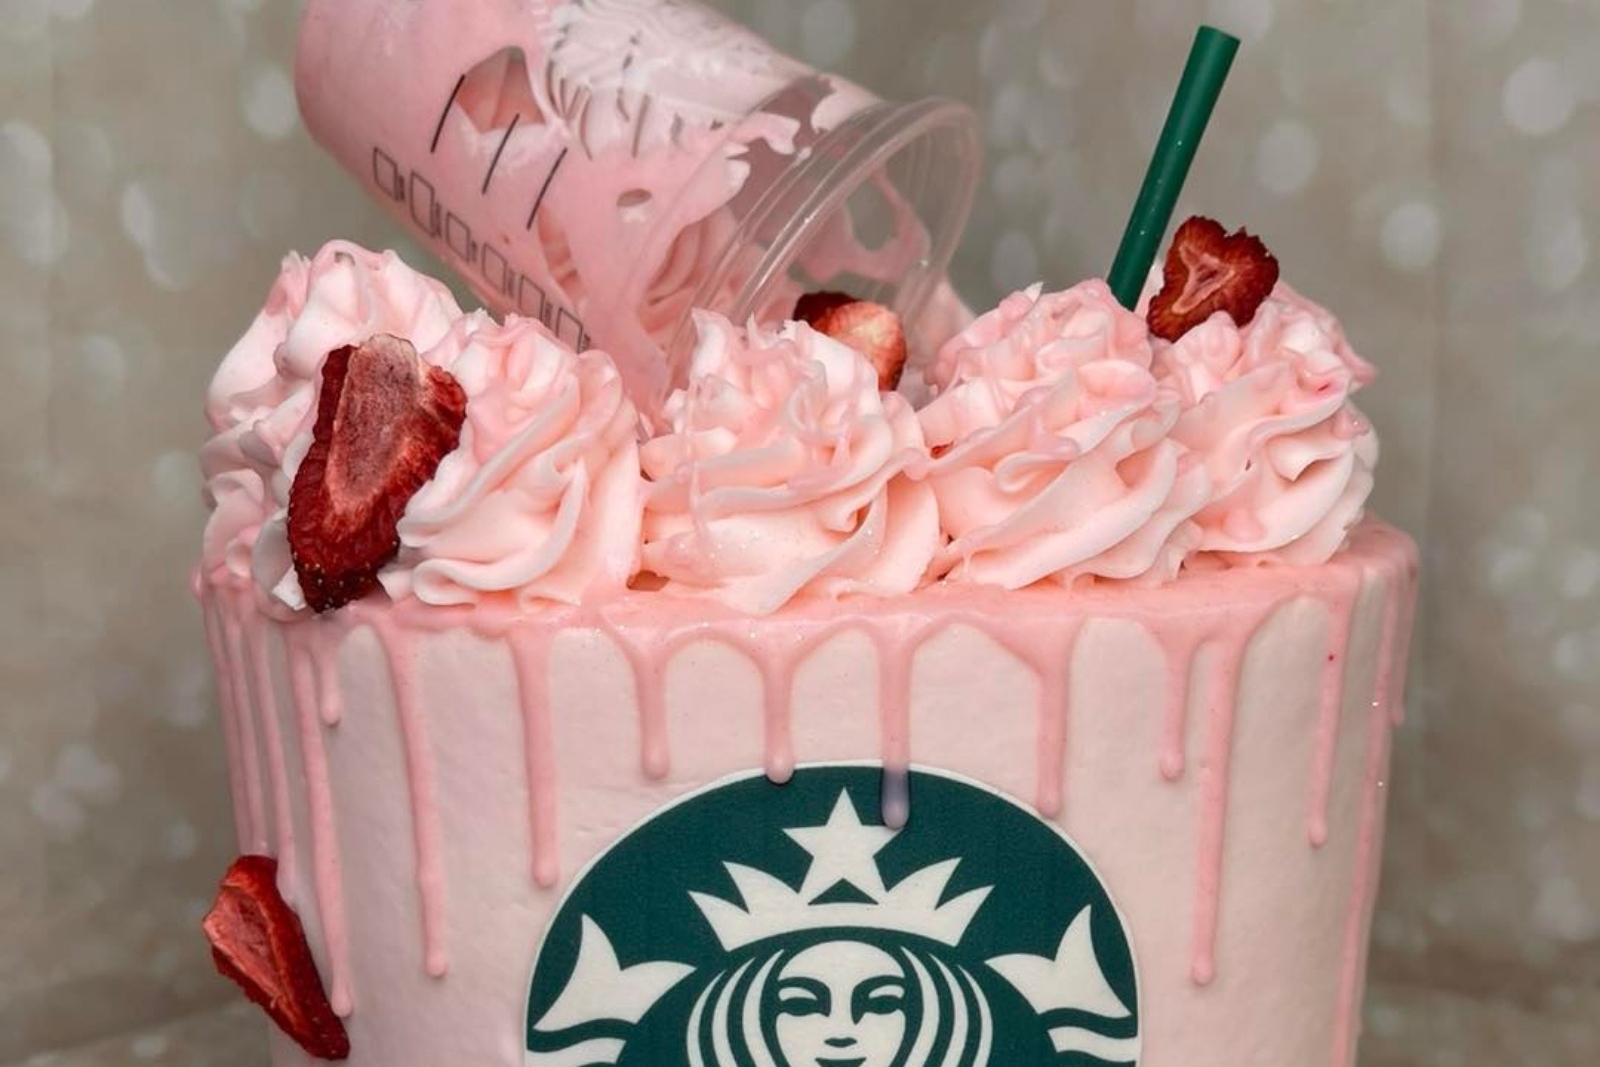 A pink cake decorated with a Starbucks logo and strawberries